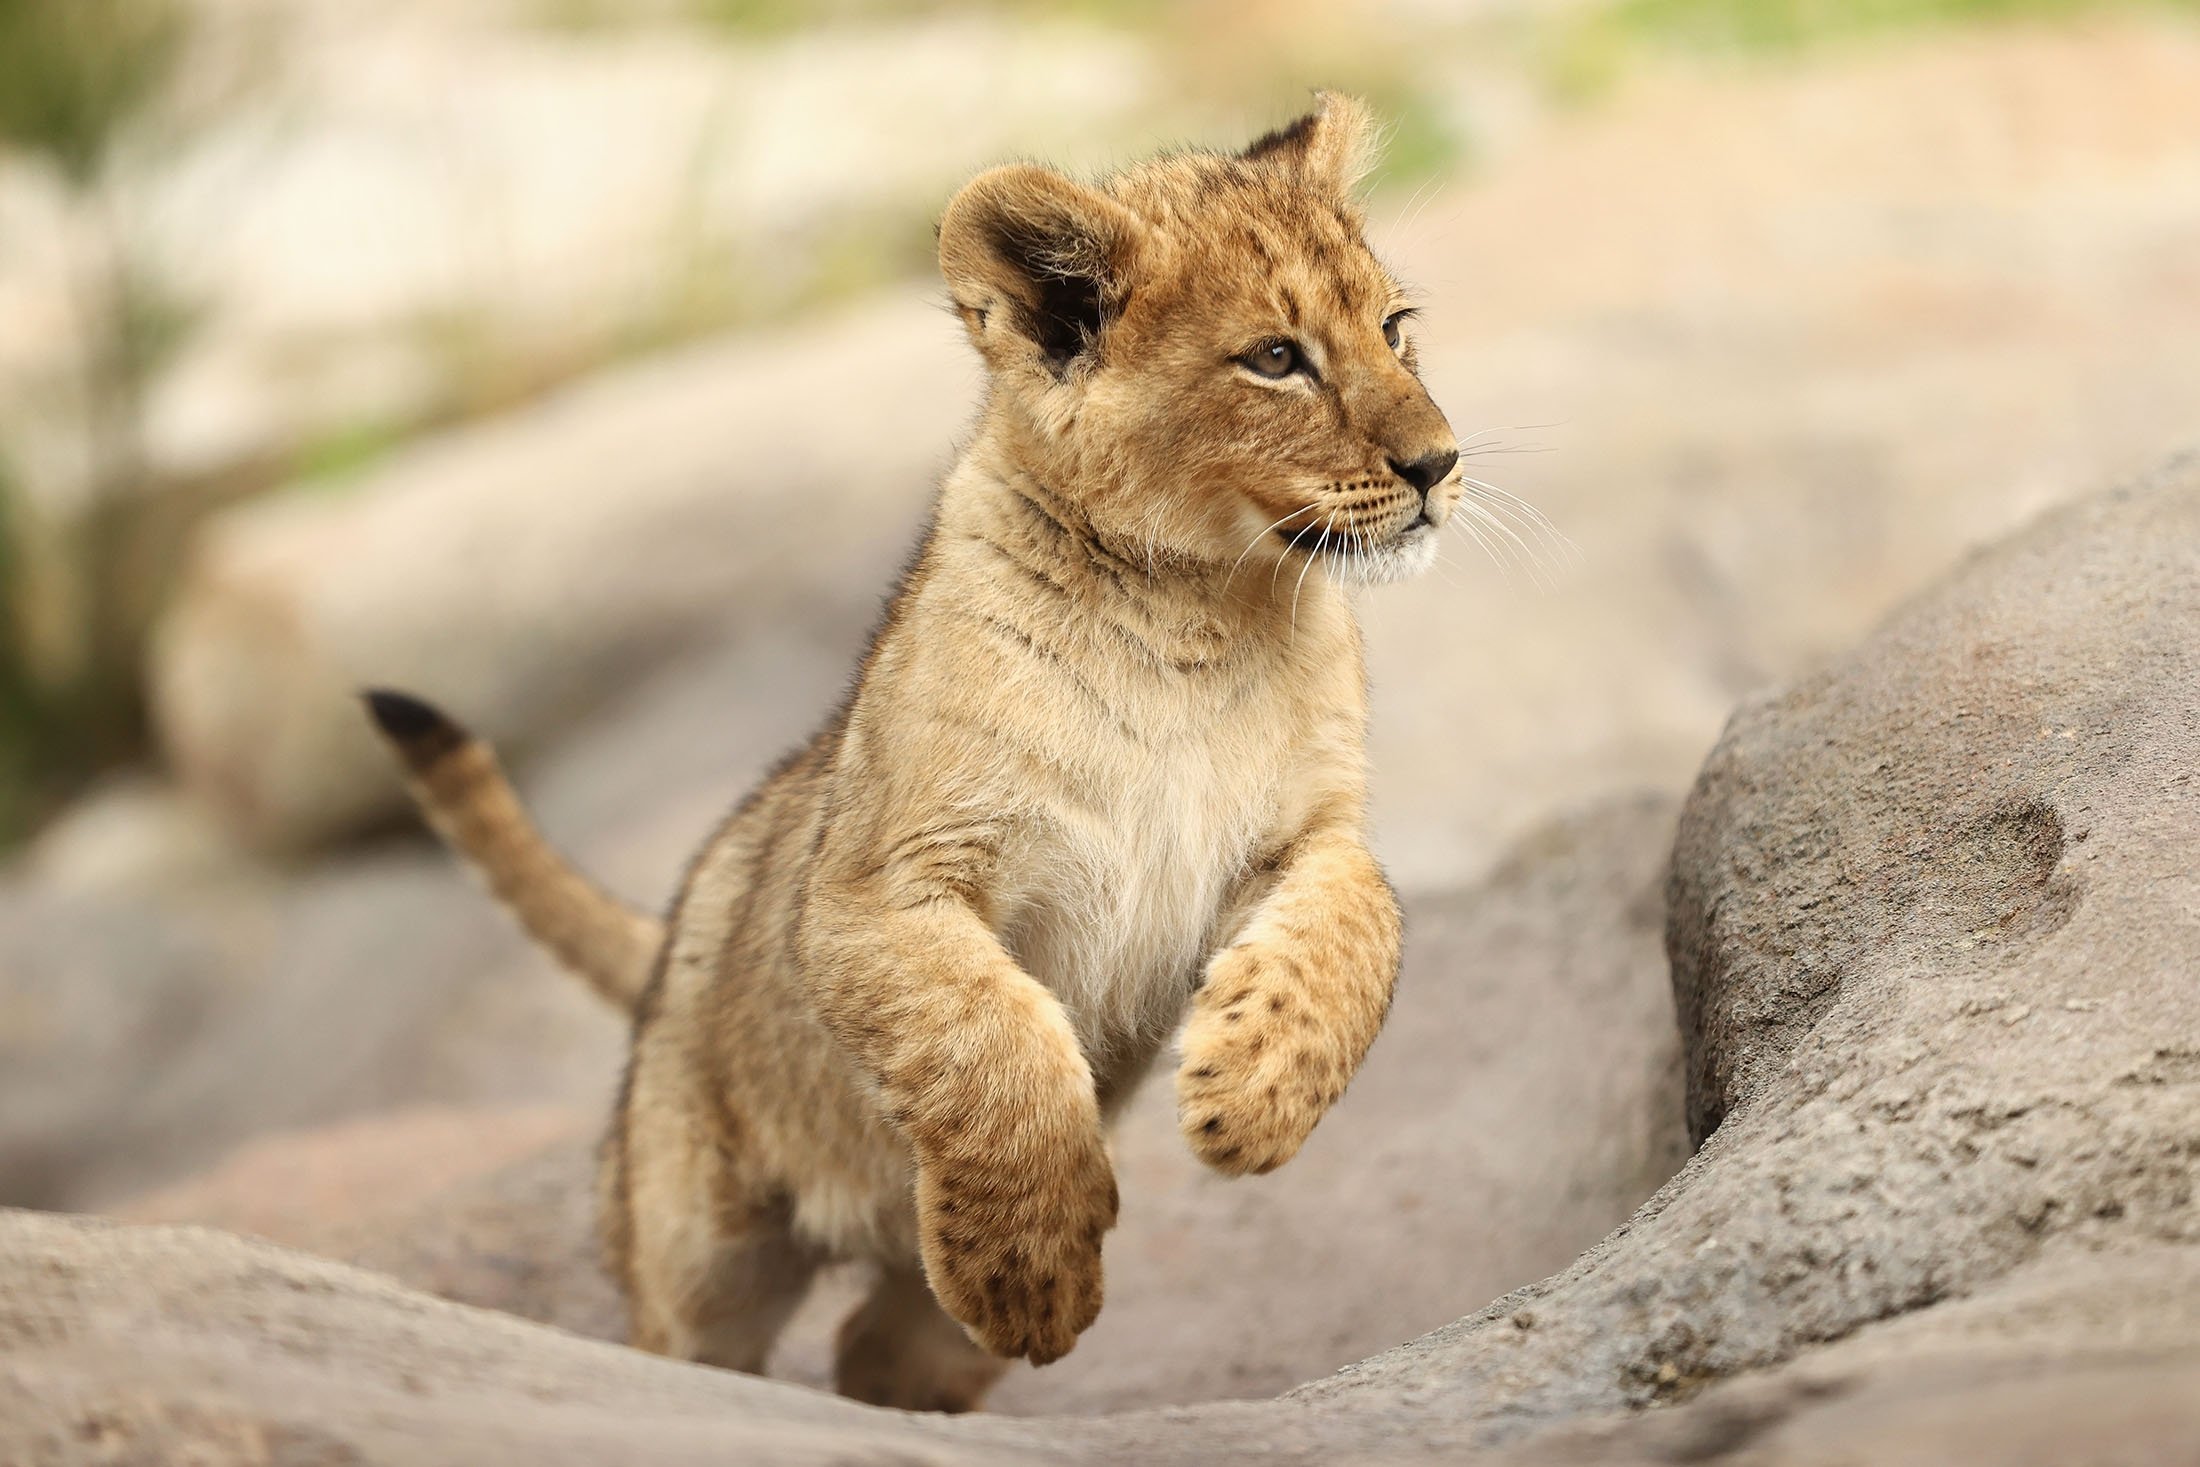 Photoshoot of the cute kind: Lion cubs make debut in Australian Zoo